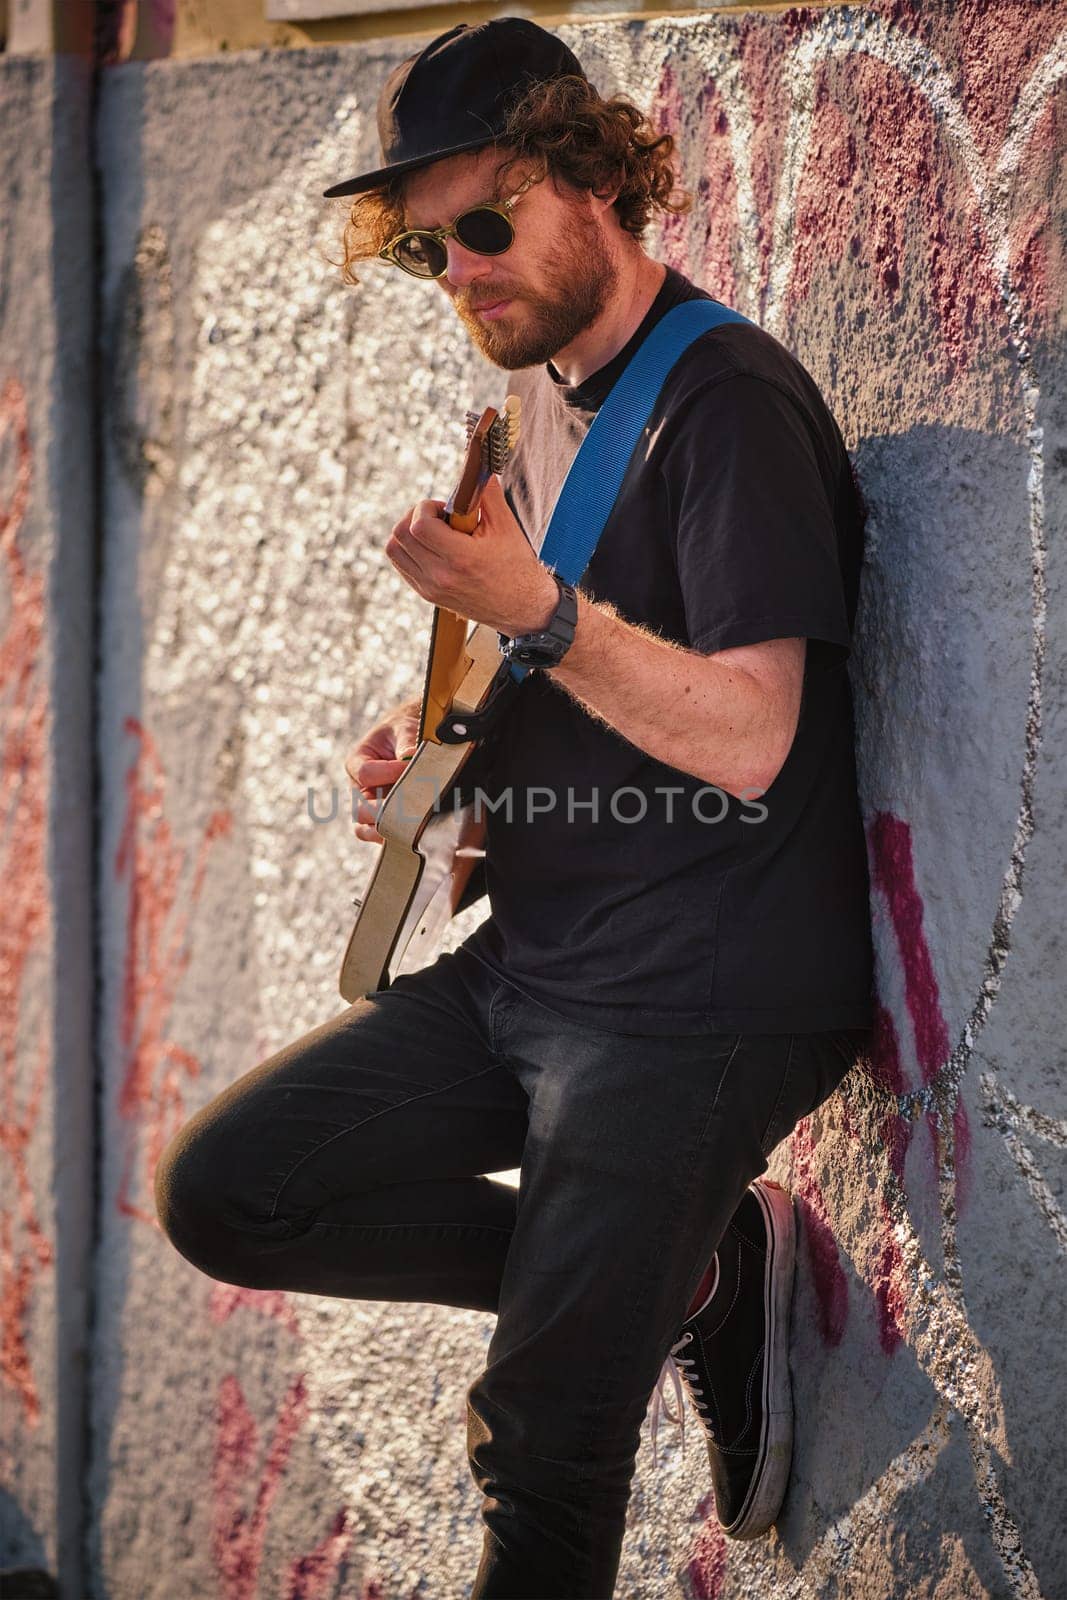 Hipster street musician in black playing electric guitar in the street on sunset leaning on a wall. Lisbon, Portugal